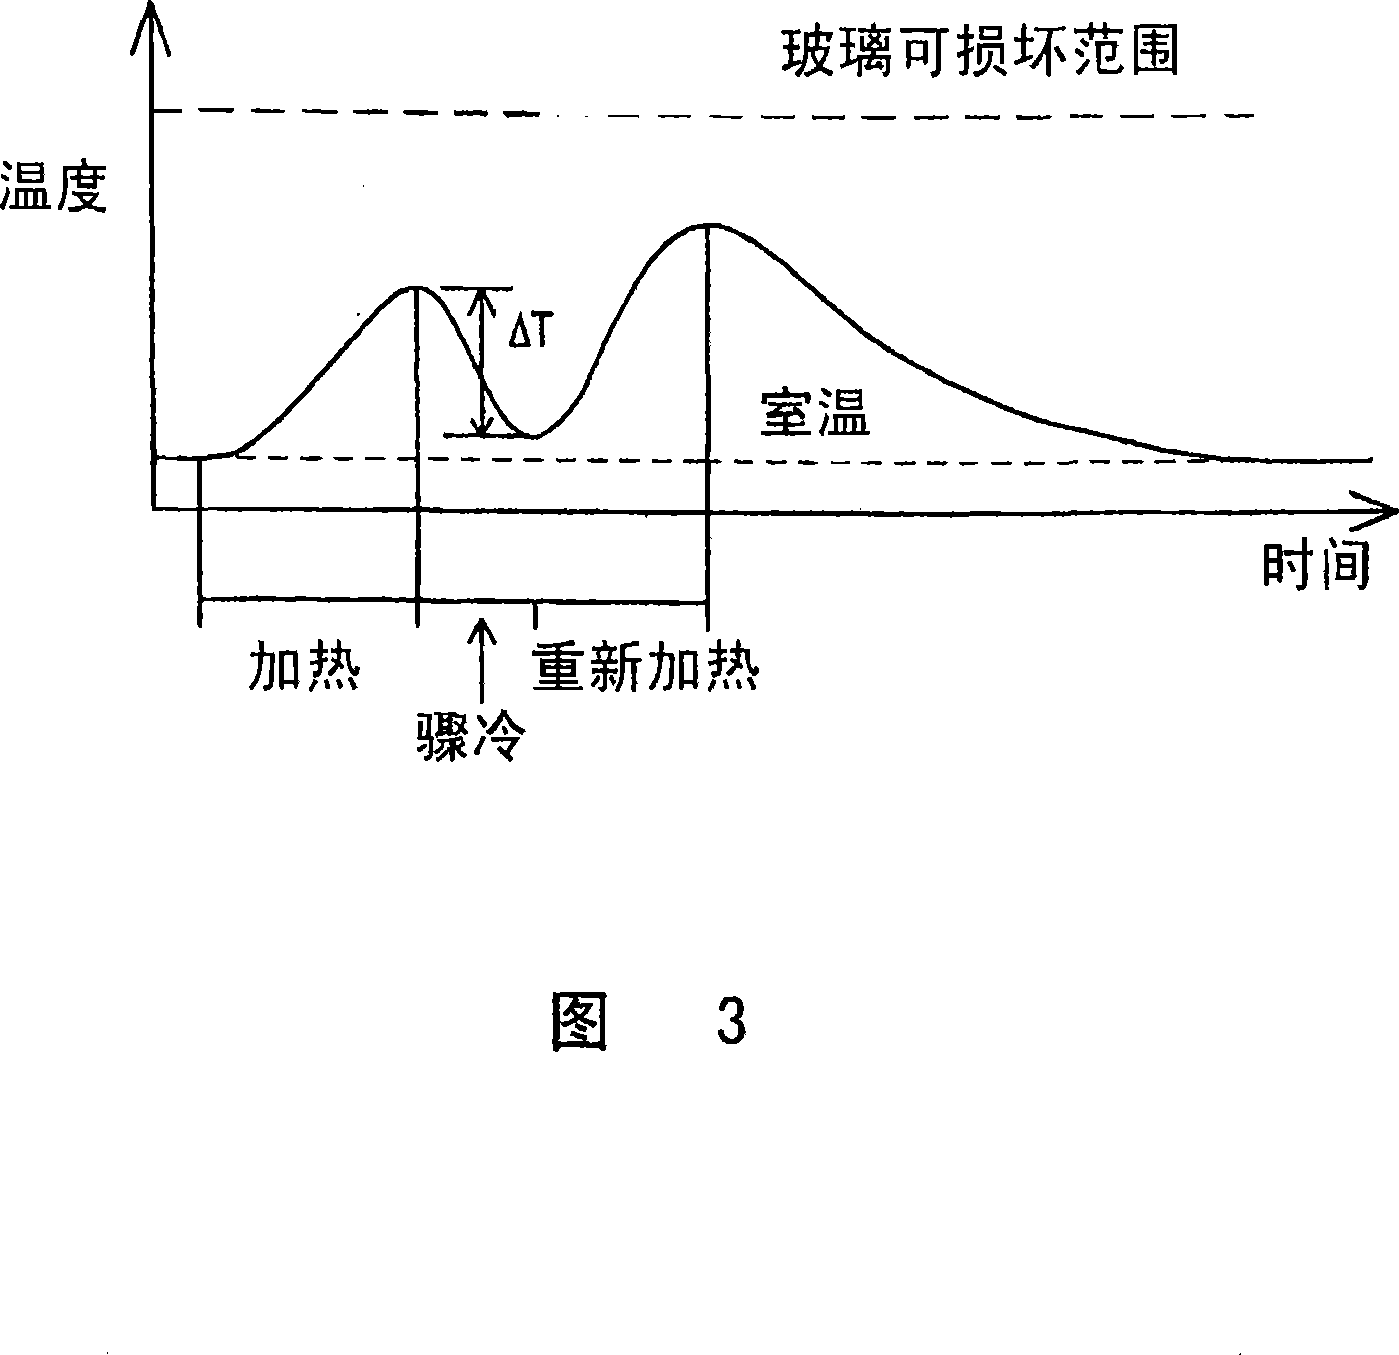 Device, system and method for cutting, cleaving or separating a substrate material